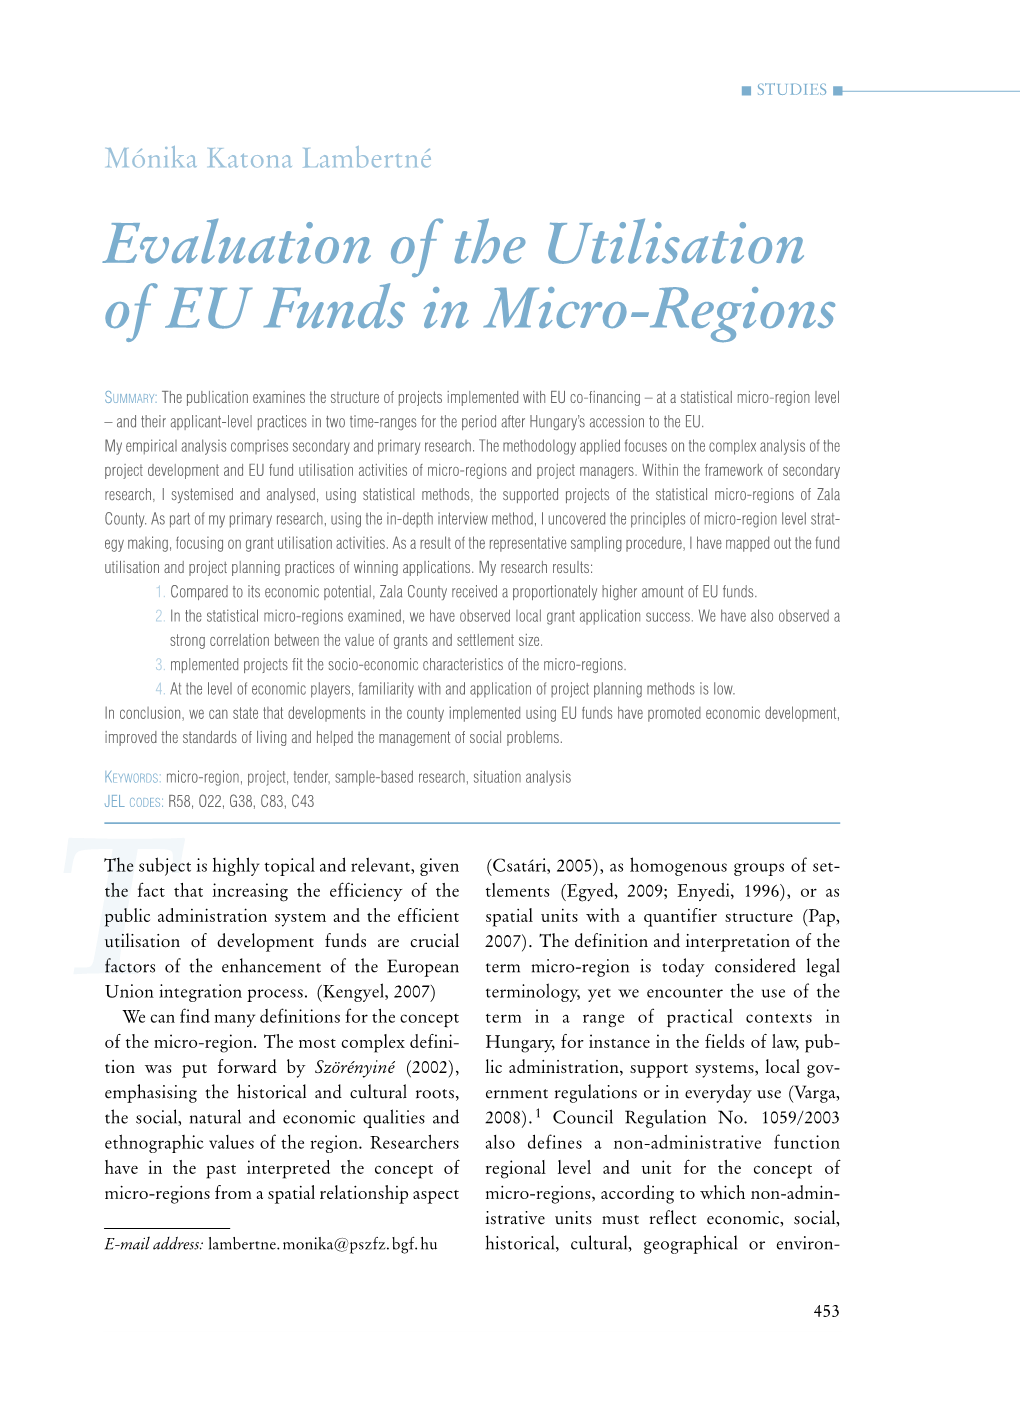 Evaluation of the Utilisation of EU Funds in Micro-Regions